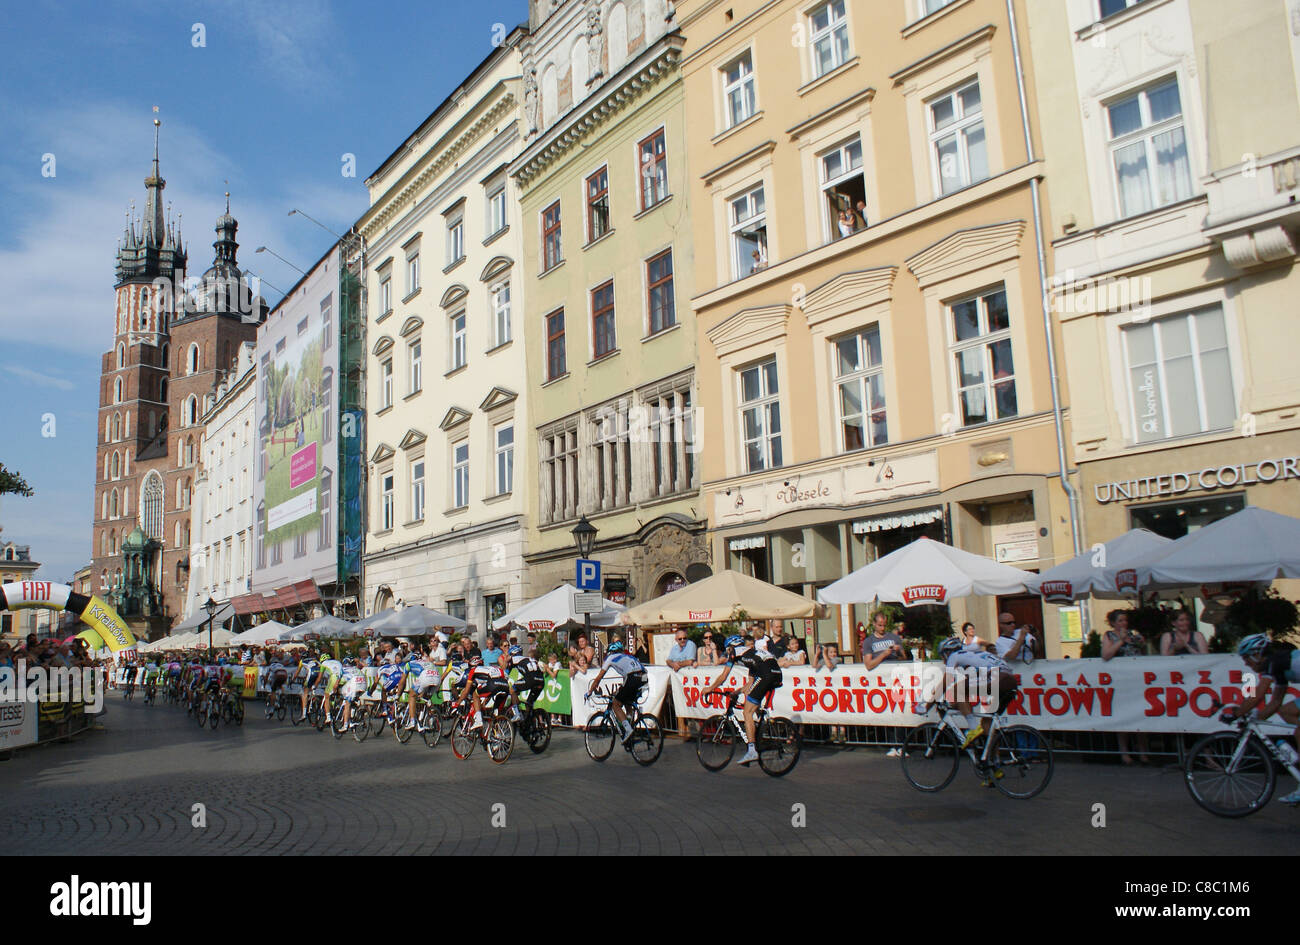 Cyclists riding in the Main Square of Old City in Cracow during last stage of Tour de Pologne 2011 race. Stock Photo